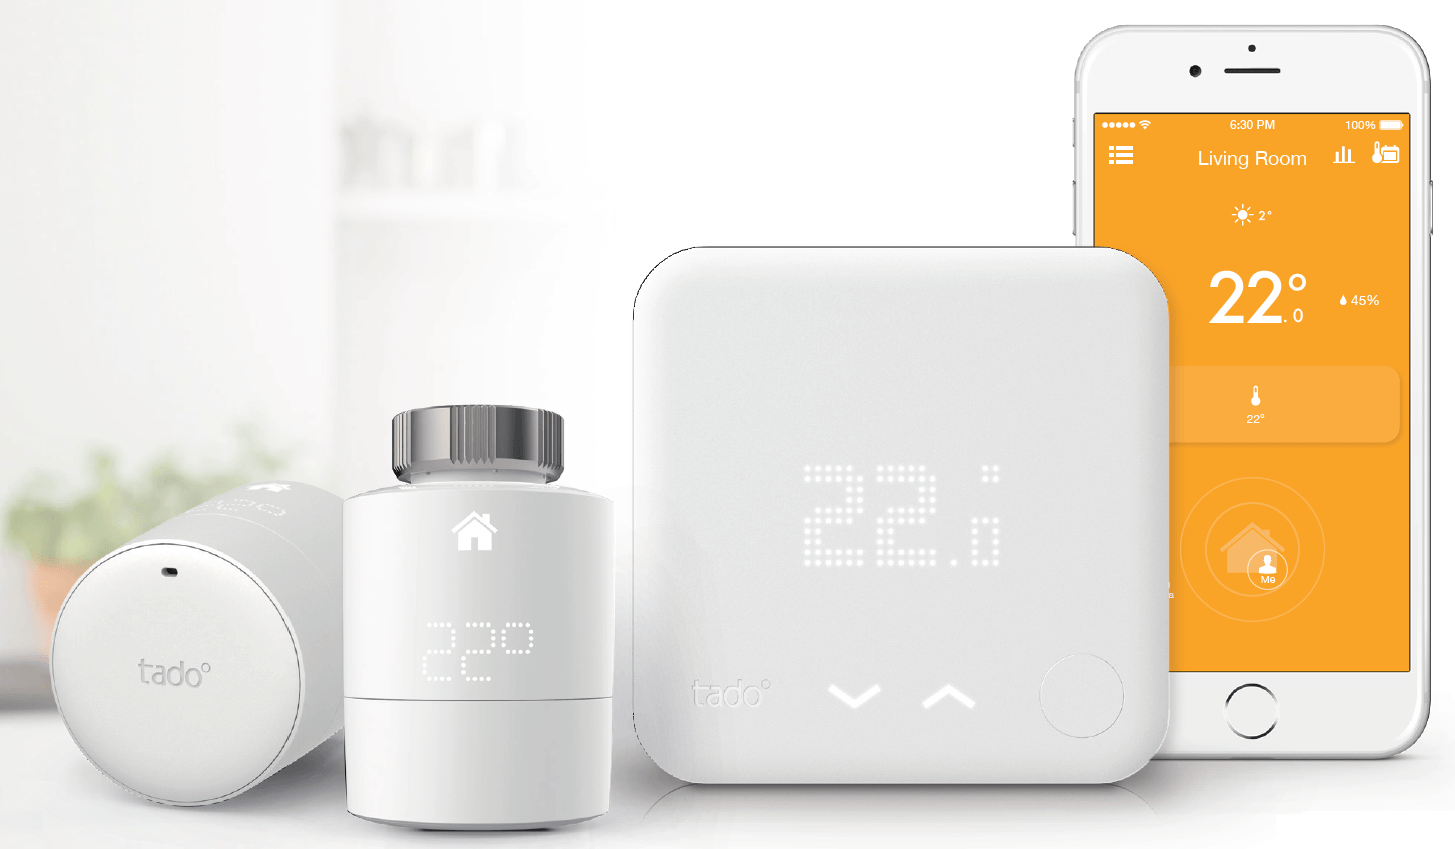 Tado thermostat along with its radiator and a smartphone with Tado app on the screen.